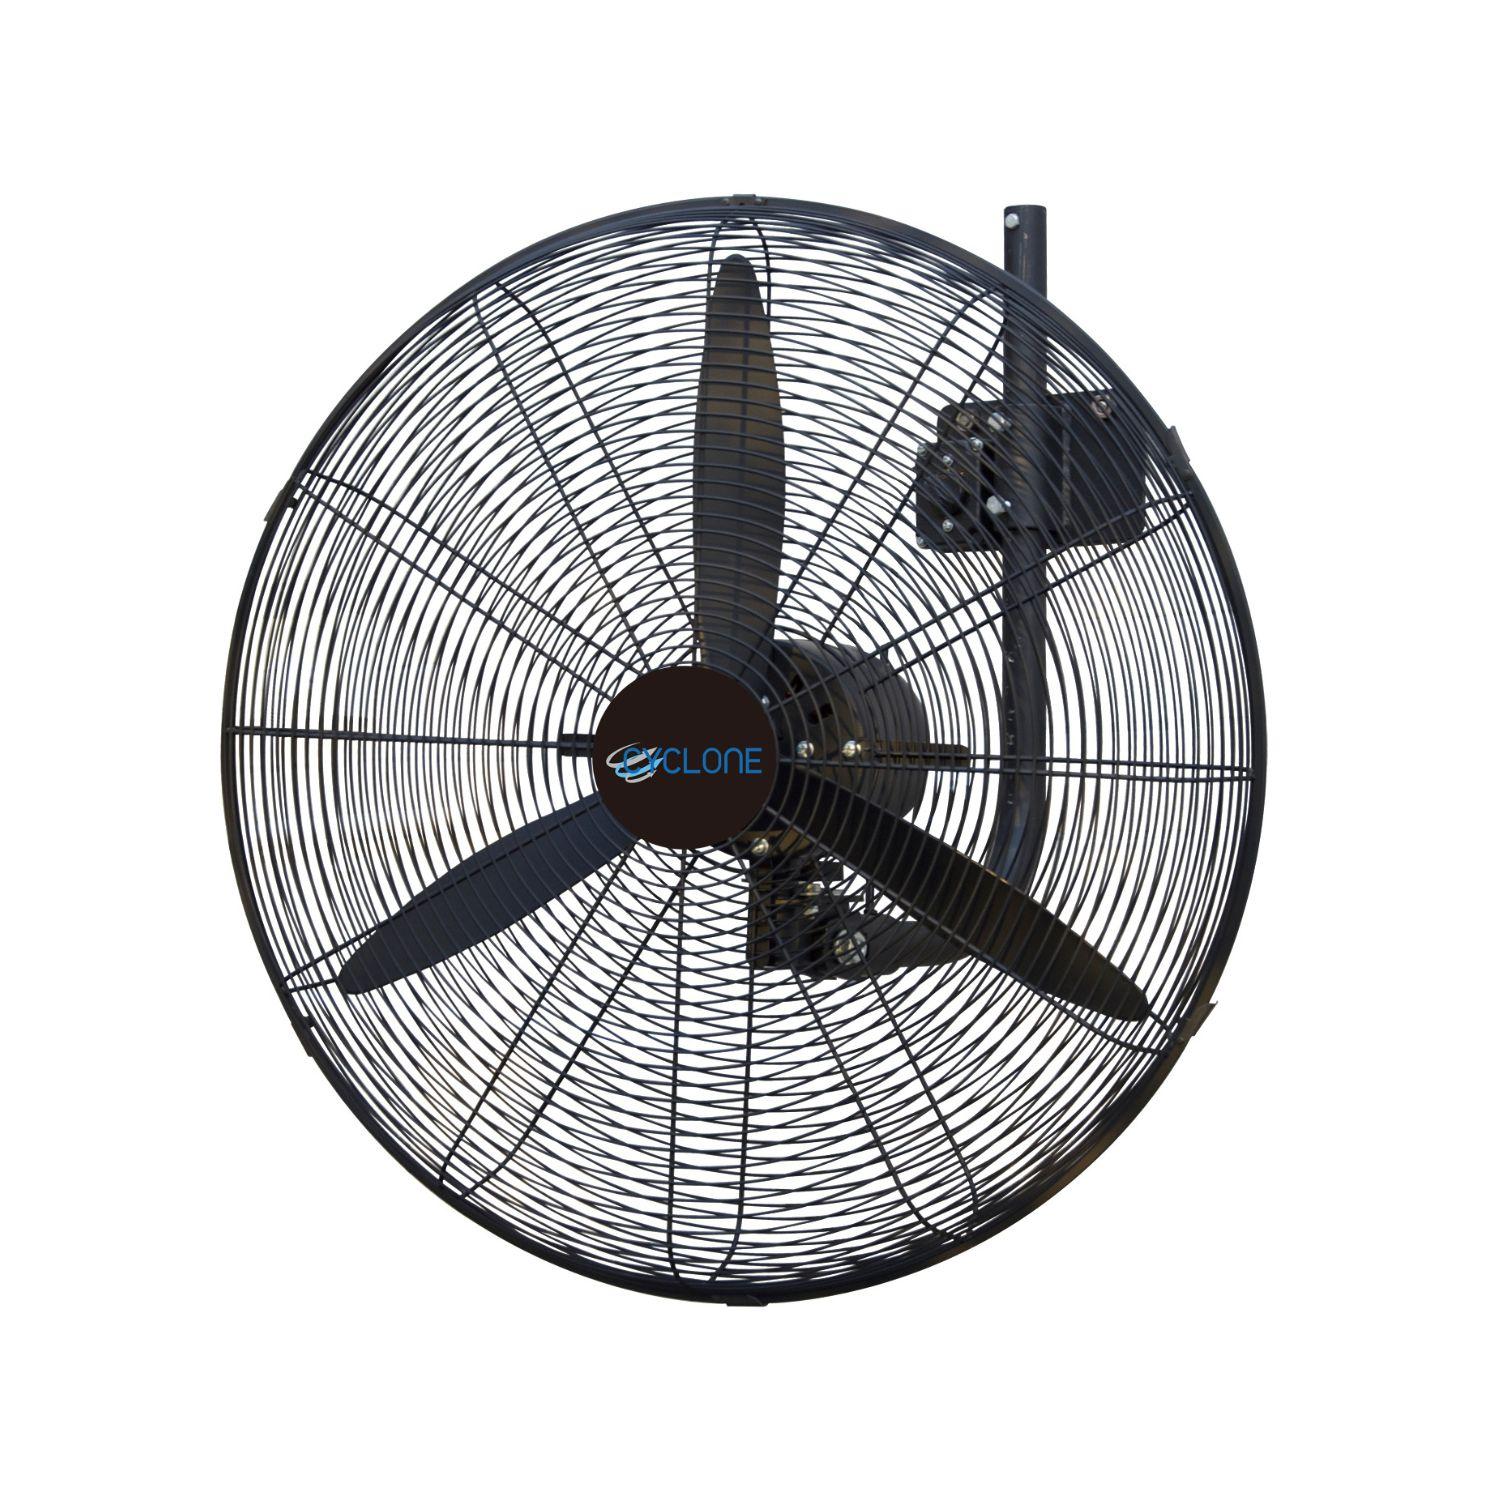 Cyclone 750TW 30 inch wall fan with remote 1